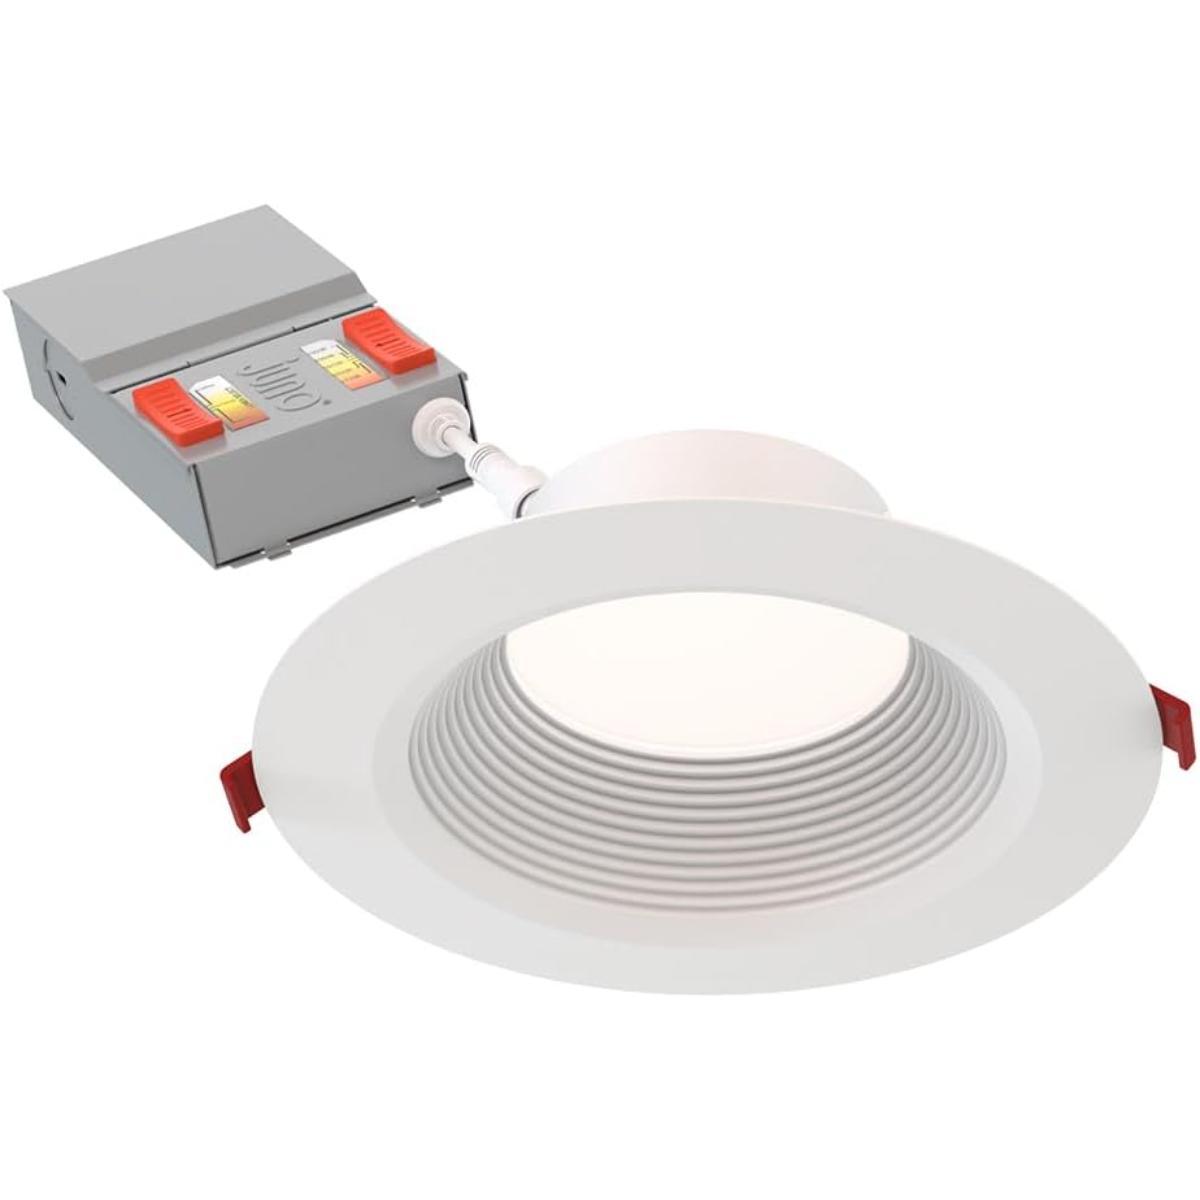 6 inch Wafer Canless LED Recessed Light, 16 Watt, 1300 Lumens, Selectable CCT, 2700K to 5000K, Baffle Trim